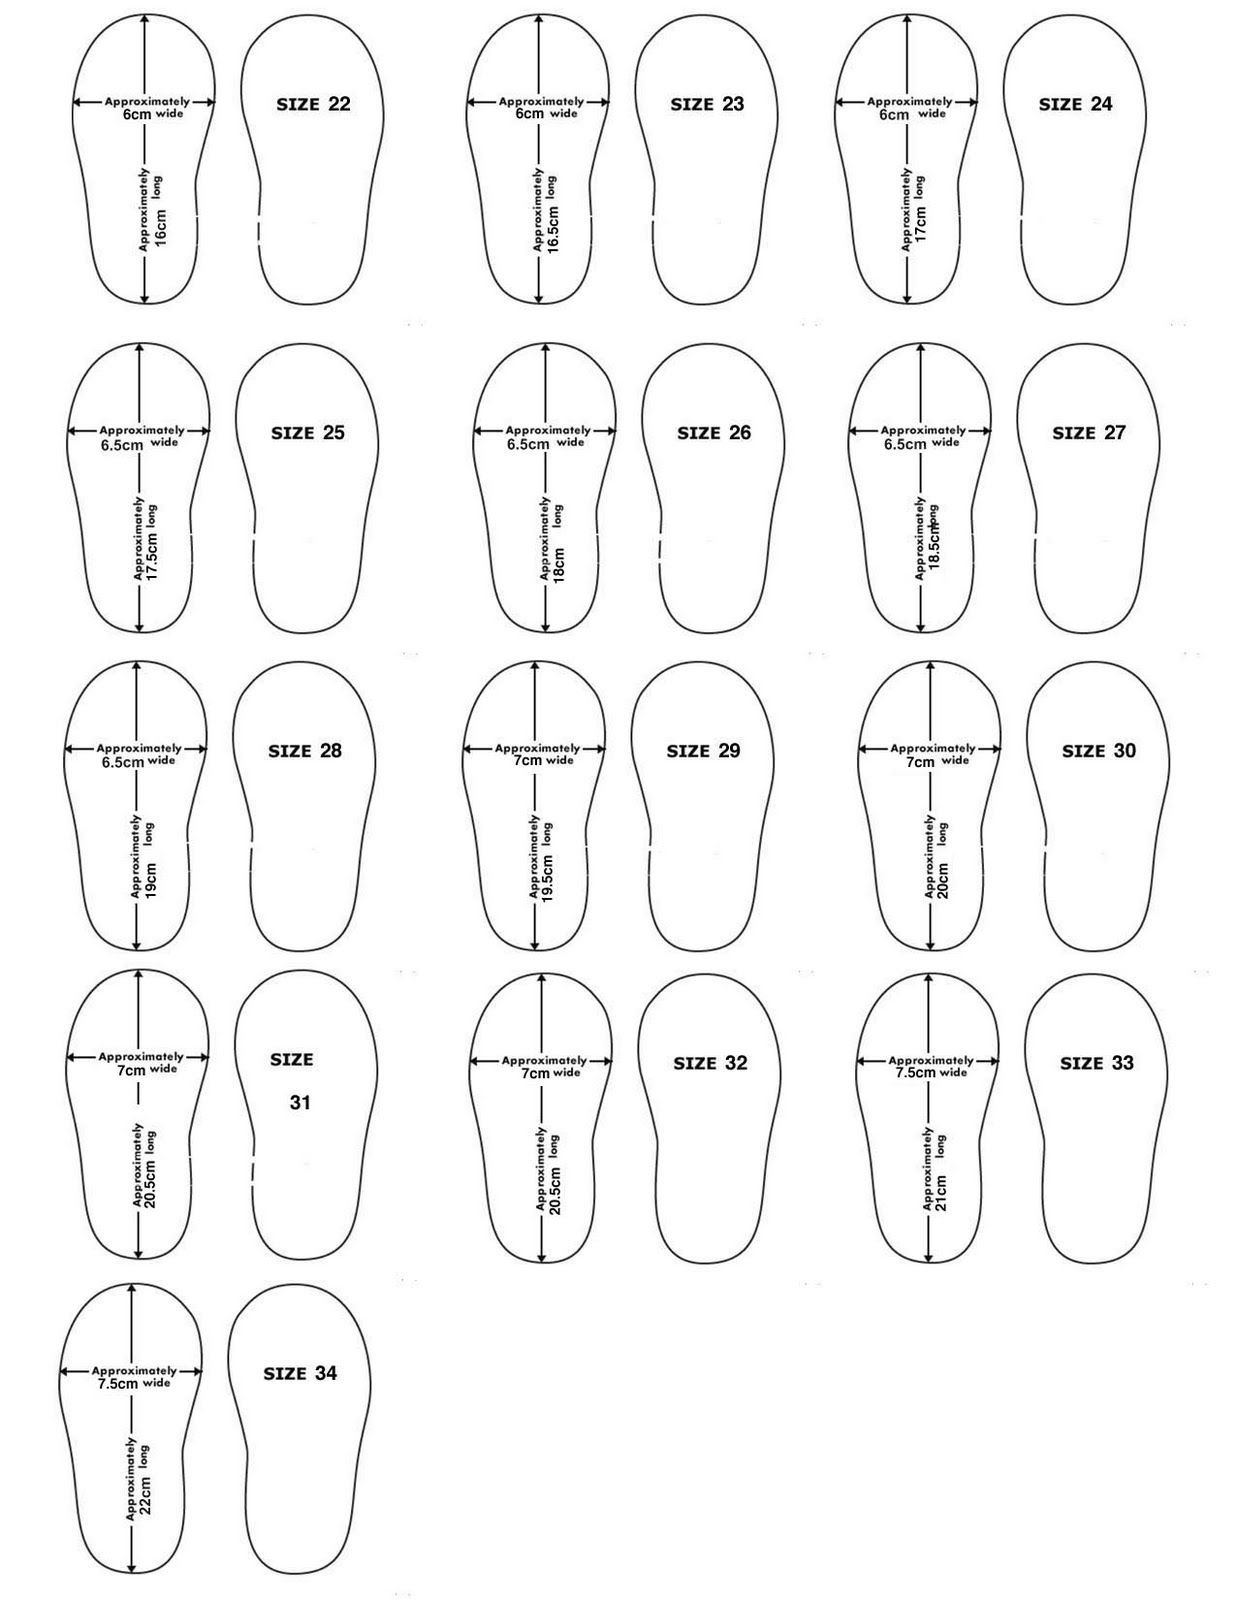 Printable Baby Shoe Size Chart | click to enlarge thumbnail)